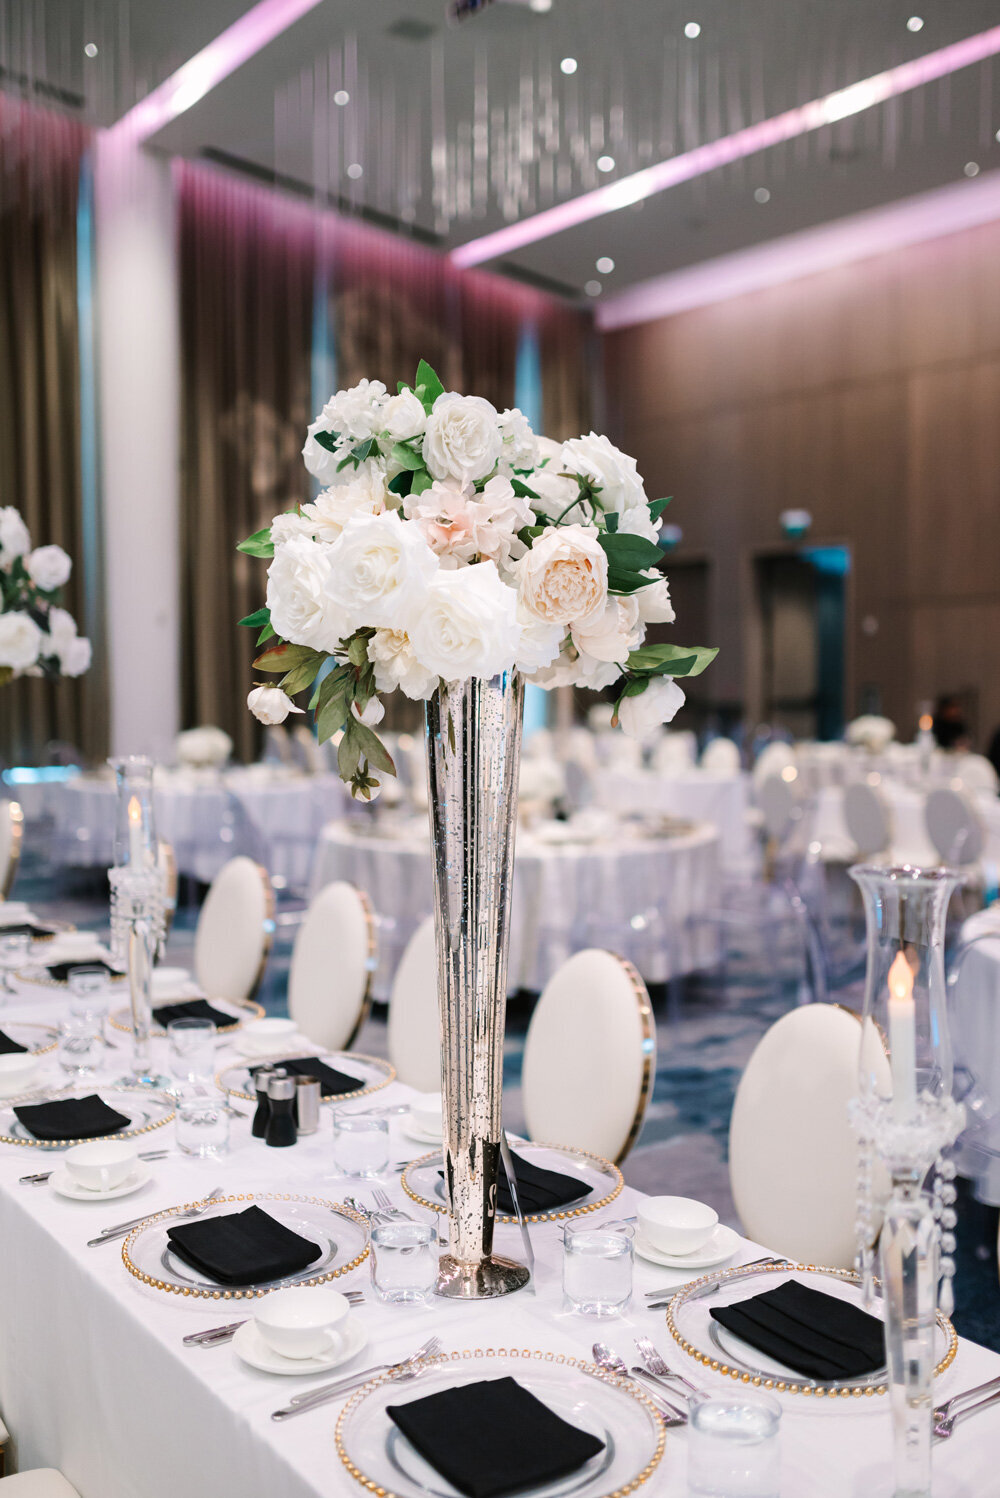 Luxurious baby pink and white wedding florals for wedding reception centrepieces.